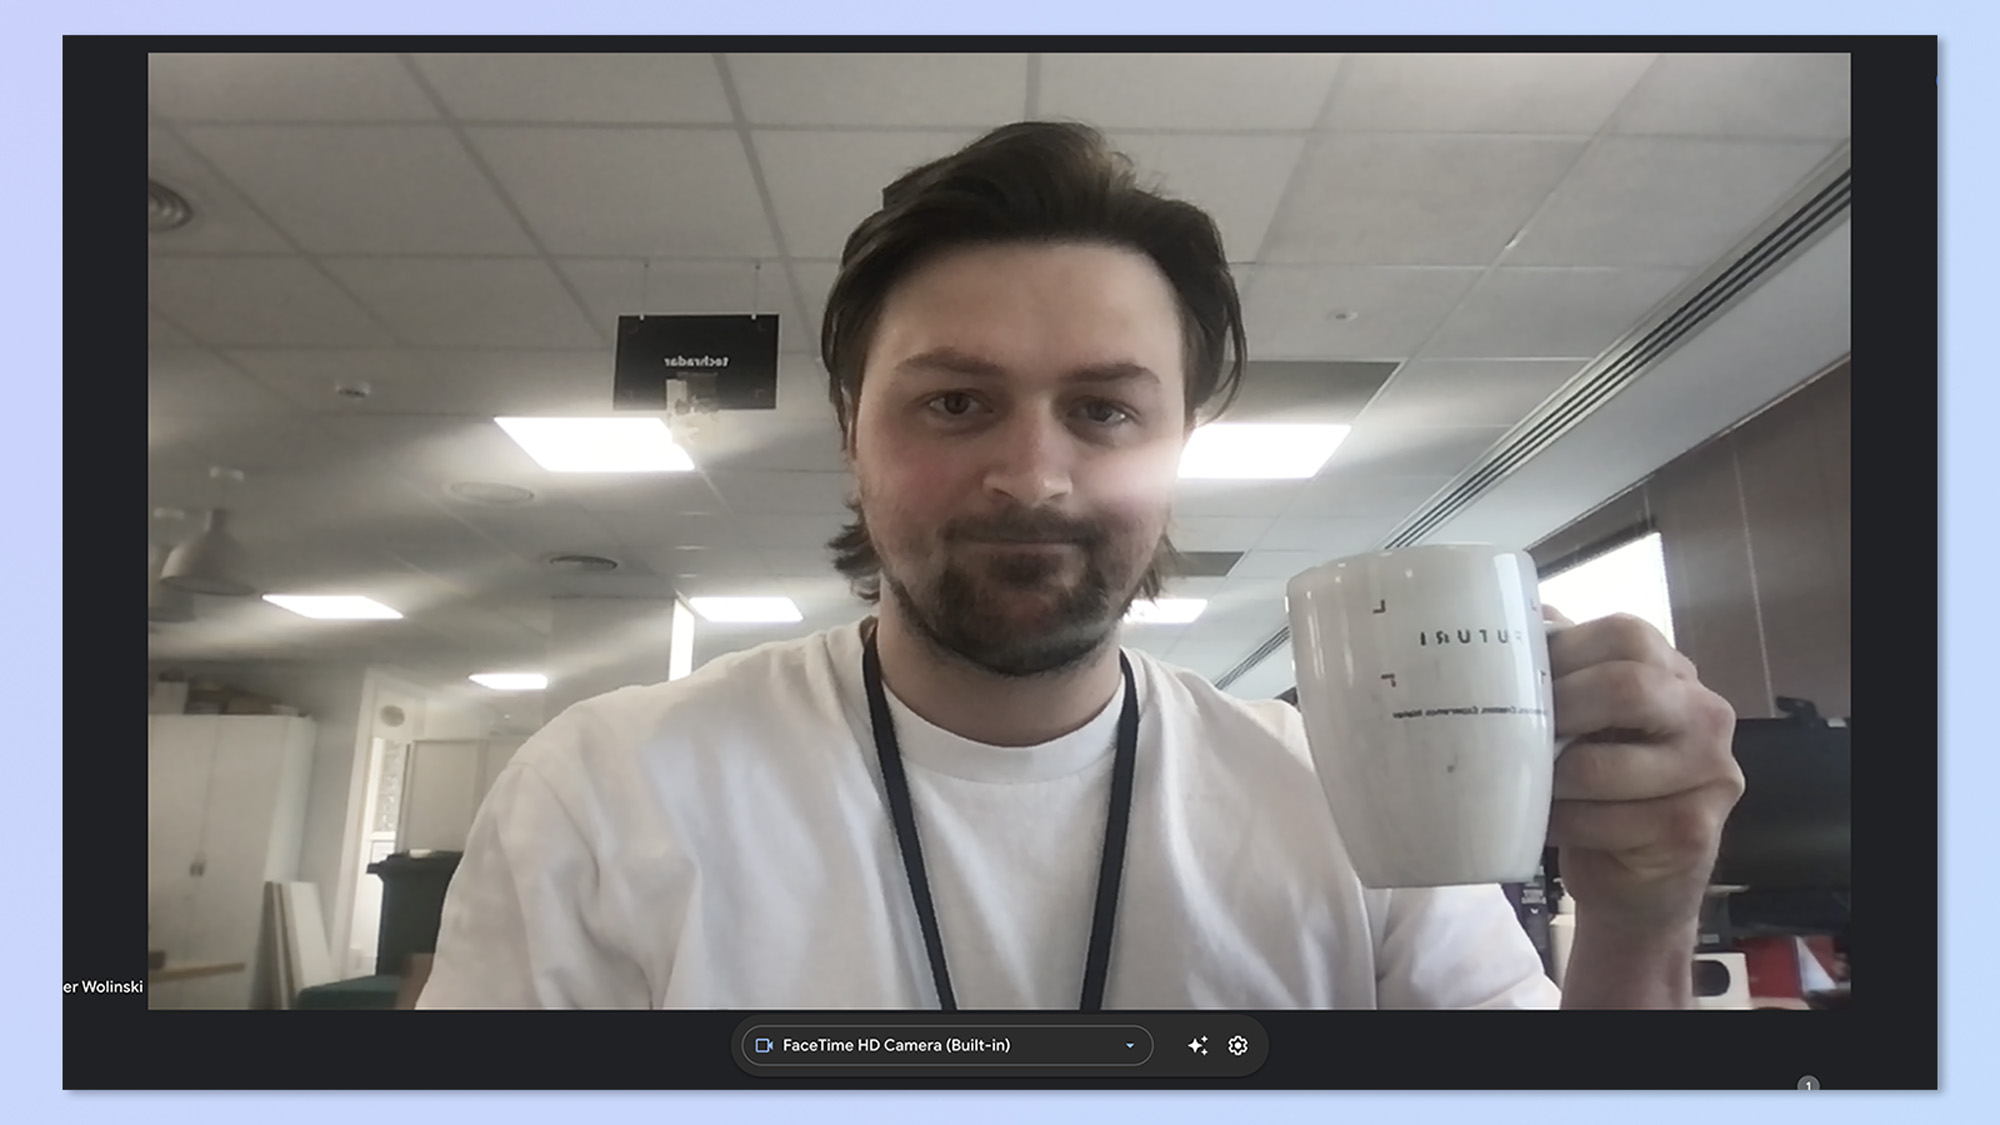 A screenshot of author Peter Wolinski, holding up a mug while on a video call. This screenshot shows the image of the built-in MacBook Pro webcam.